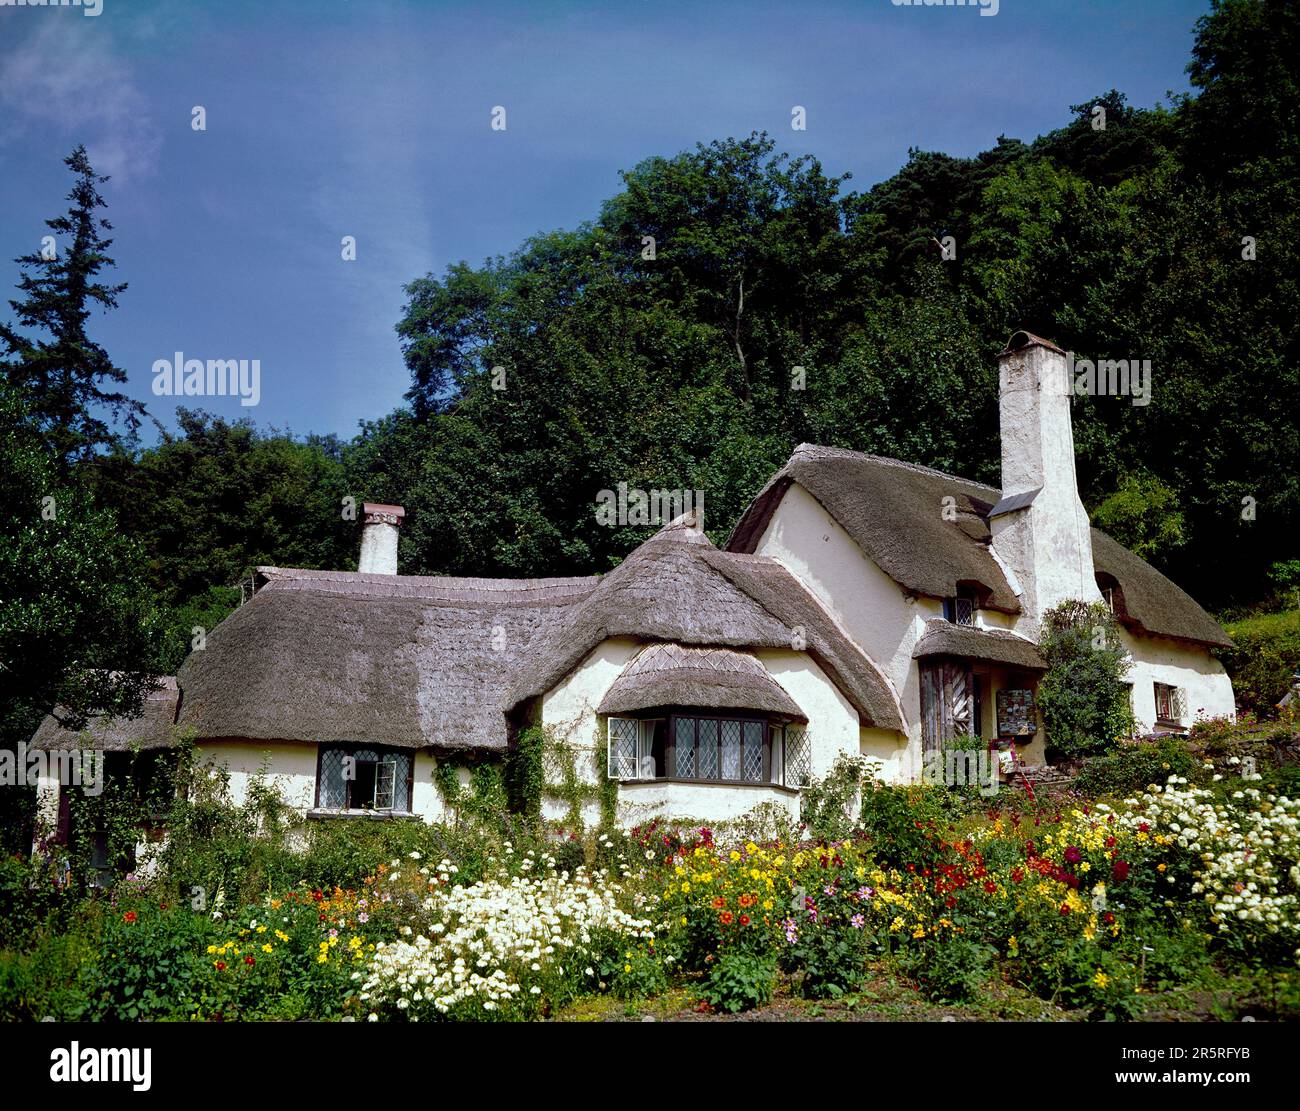 Inghilterra. Somerset. Verde Selworthy. Cottage con tetto in paglia. Foto Stock